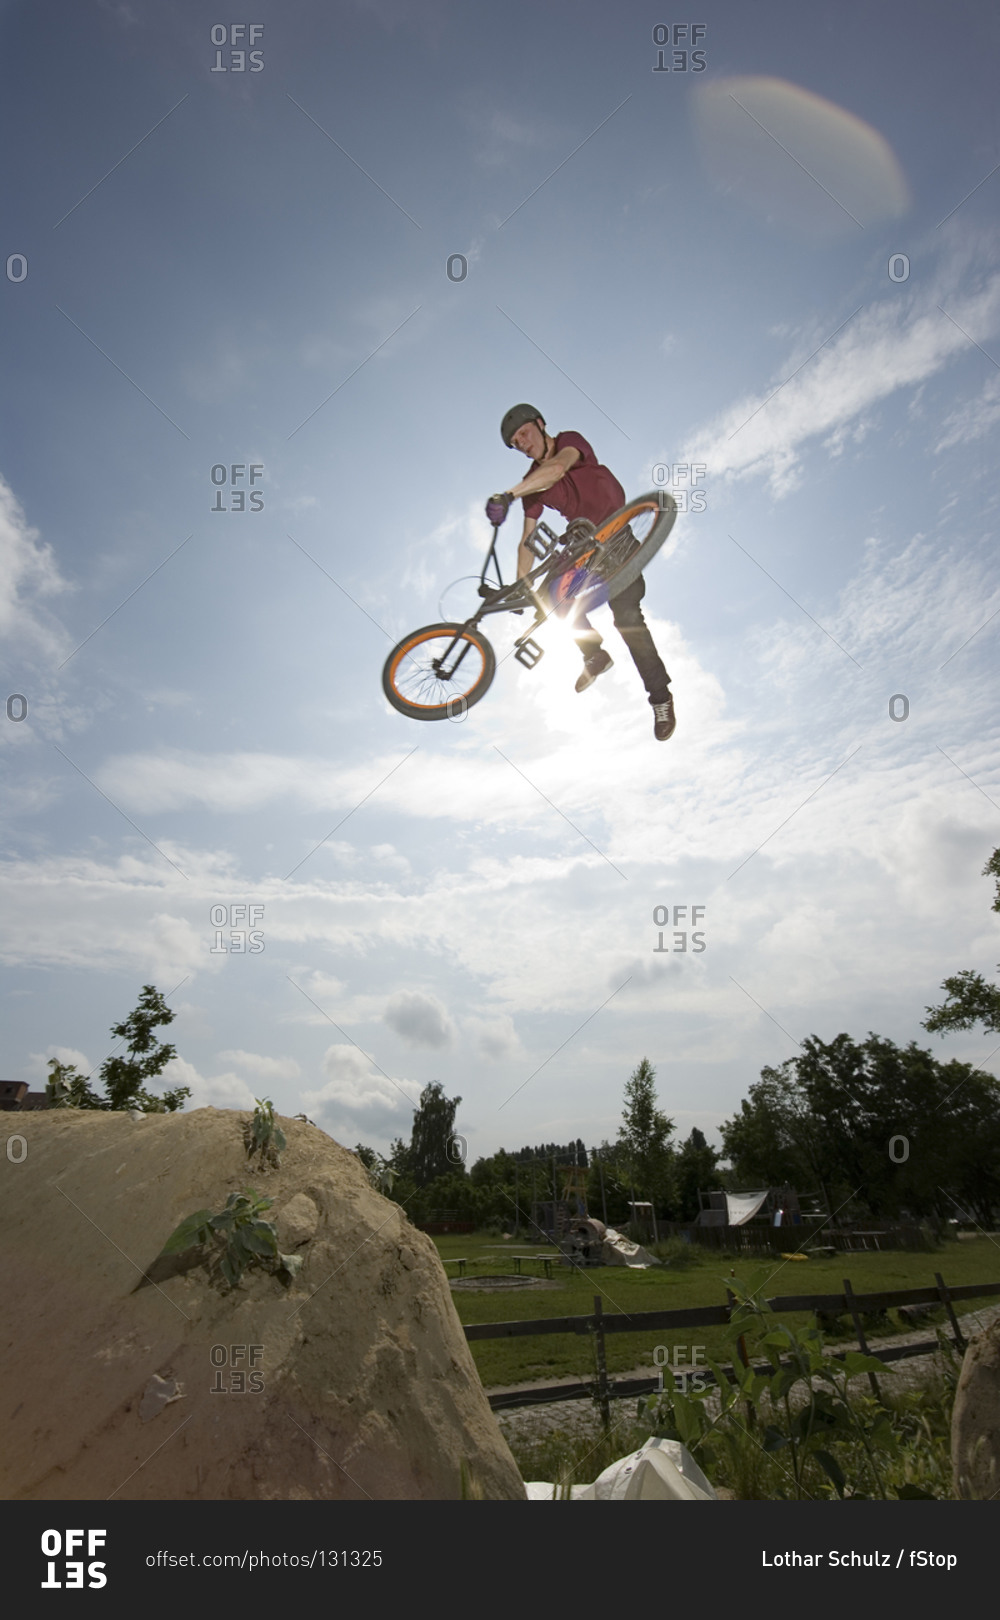 A BMX rider doing a stunt in mid-air